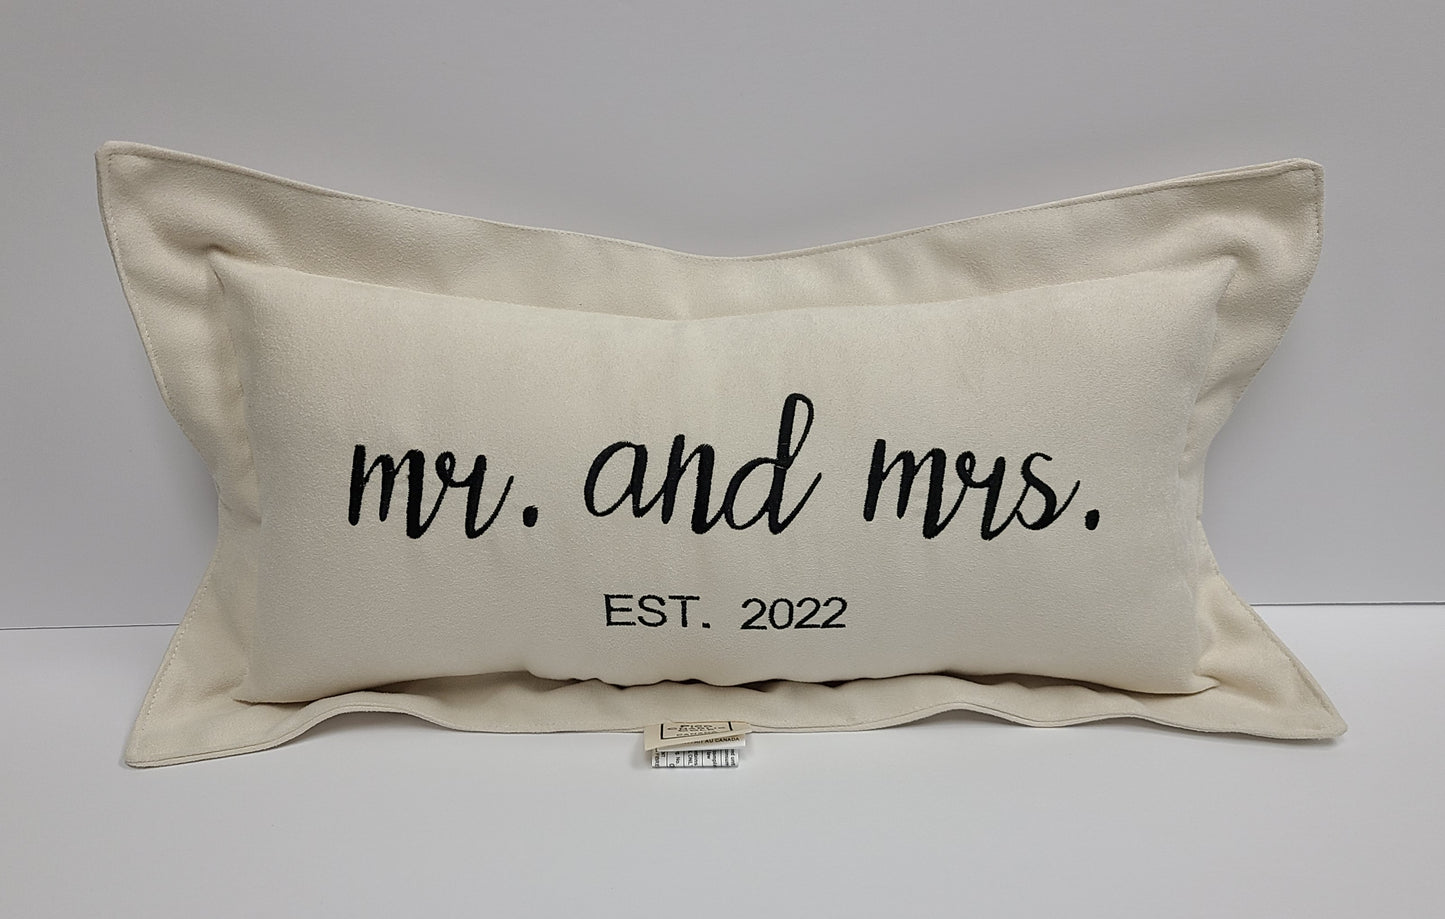 Mr. And Mrs. Est. 2022 Mini UltraSuede Pillow